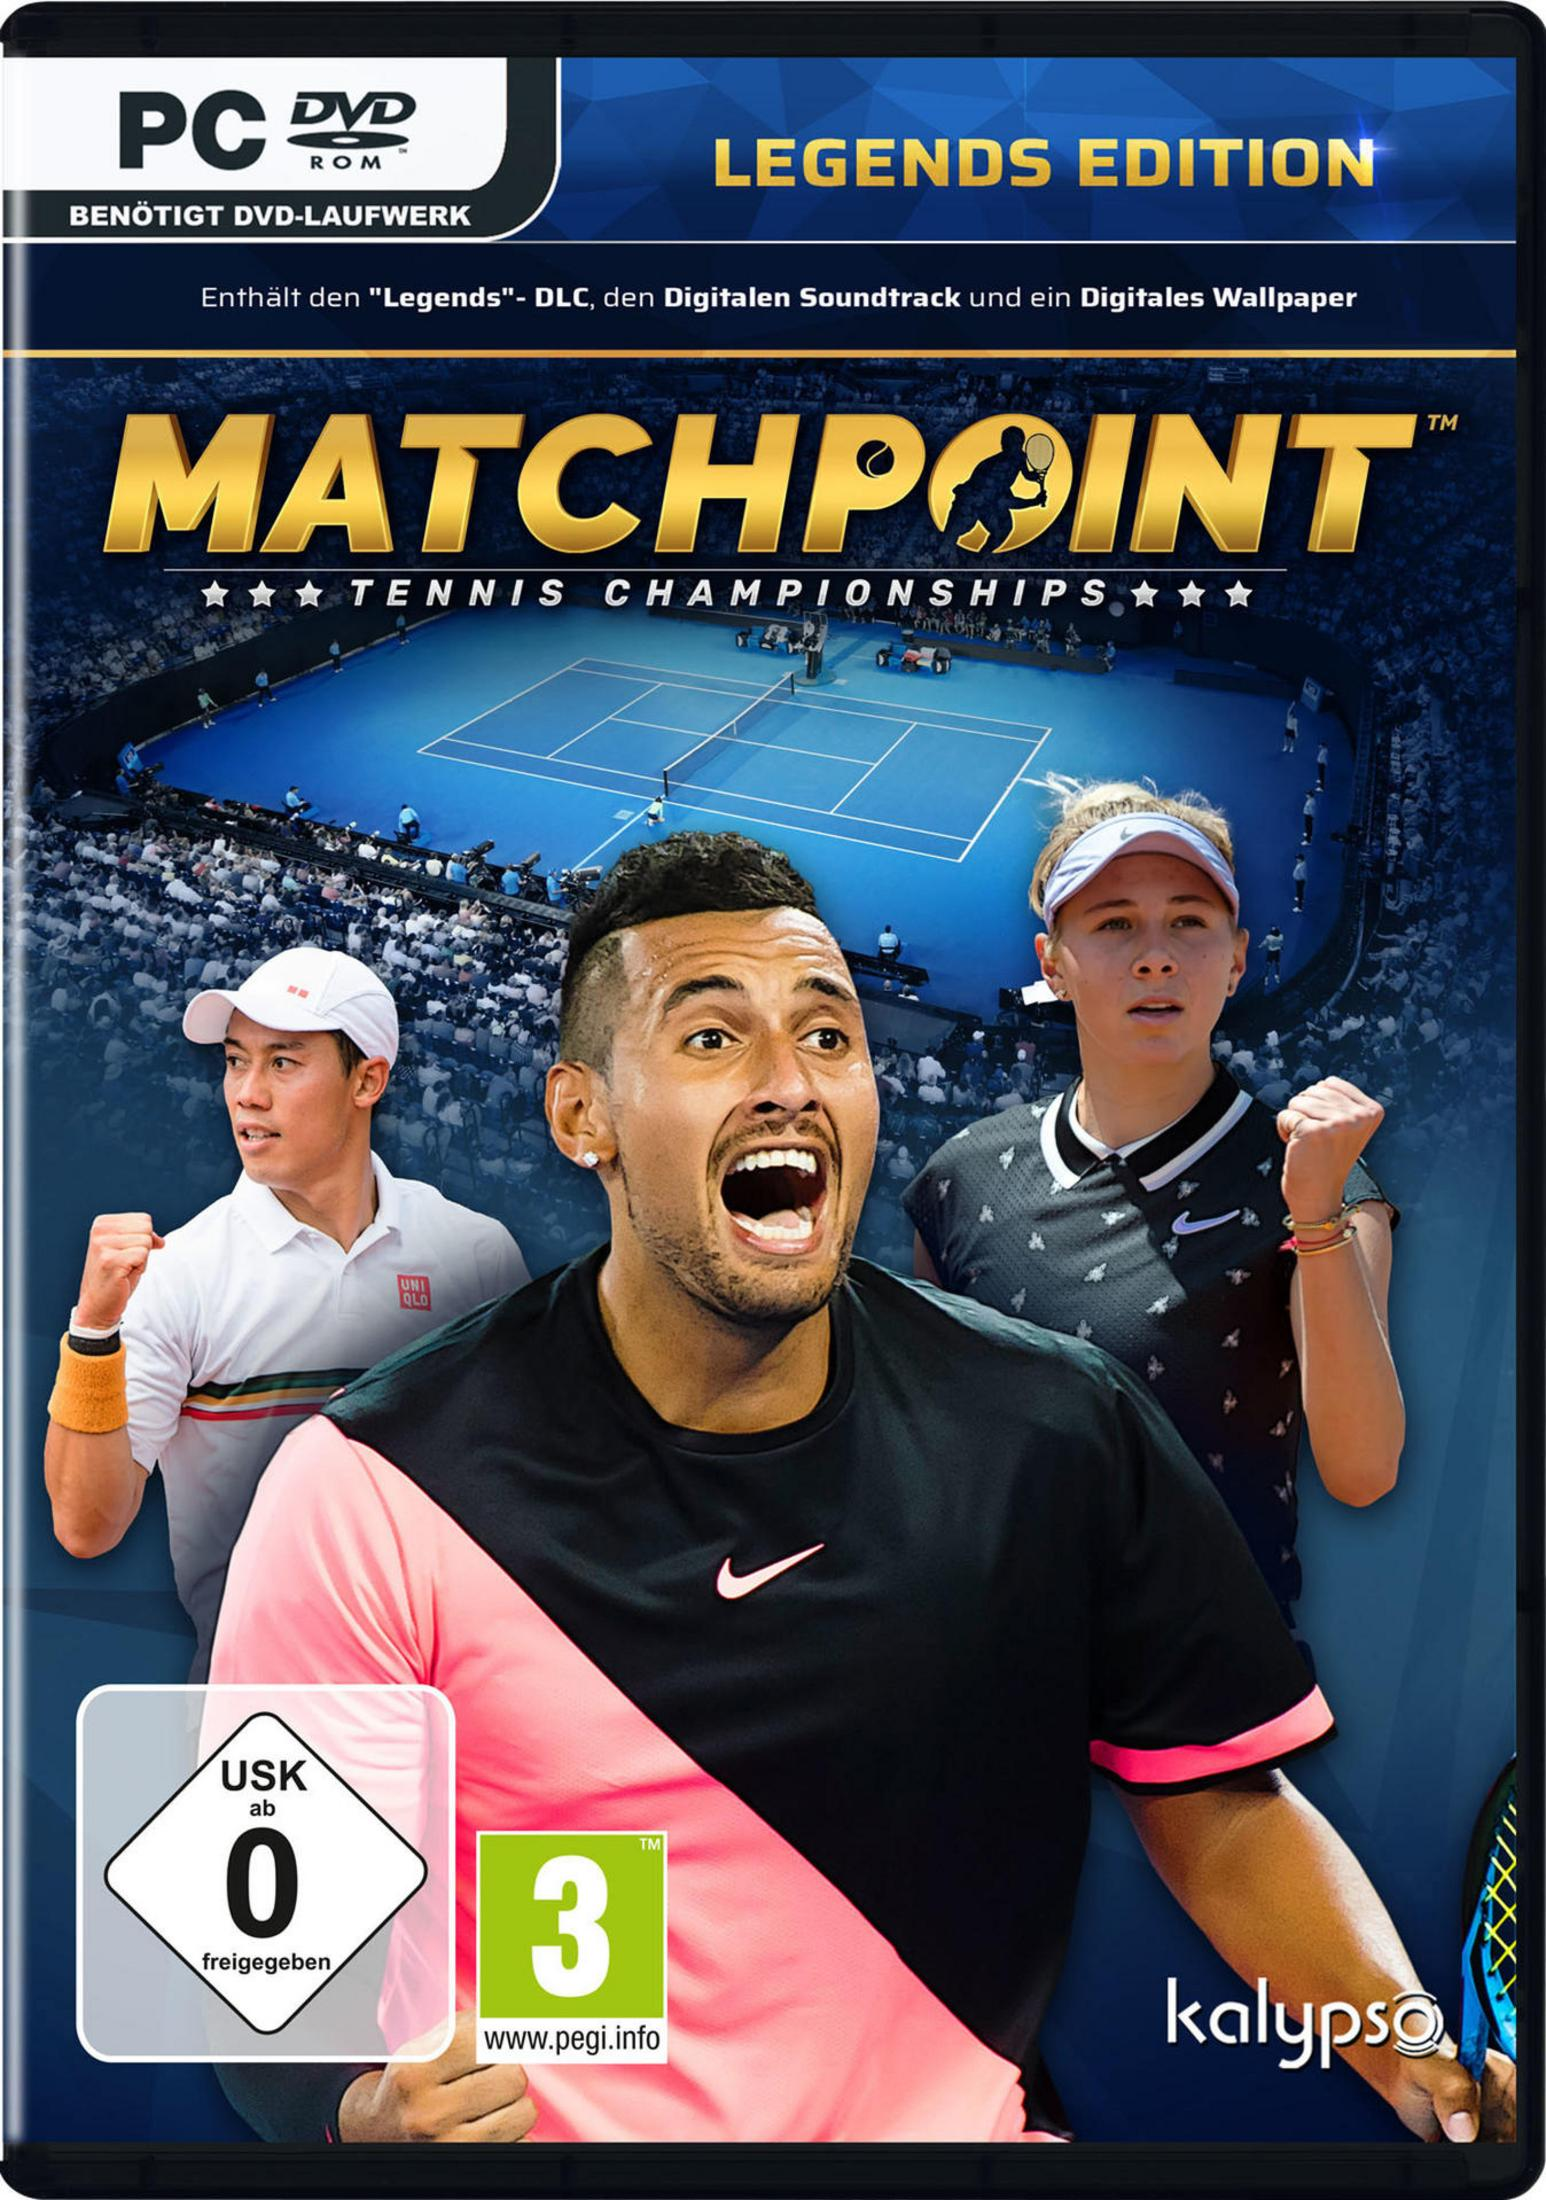 MATCHPOINT - TENNIS CHAMPIONSHIPS LEGENDS [PC] - EDITION